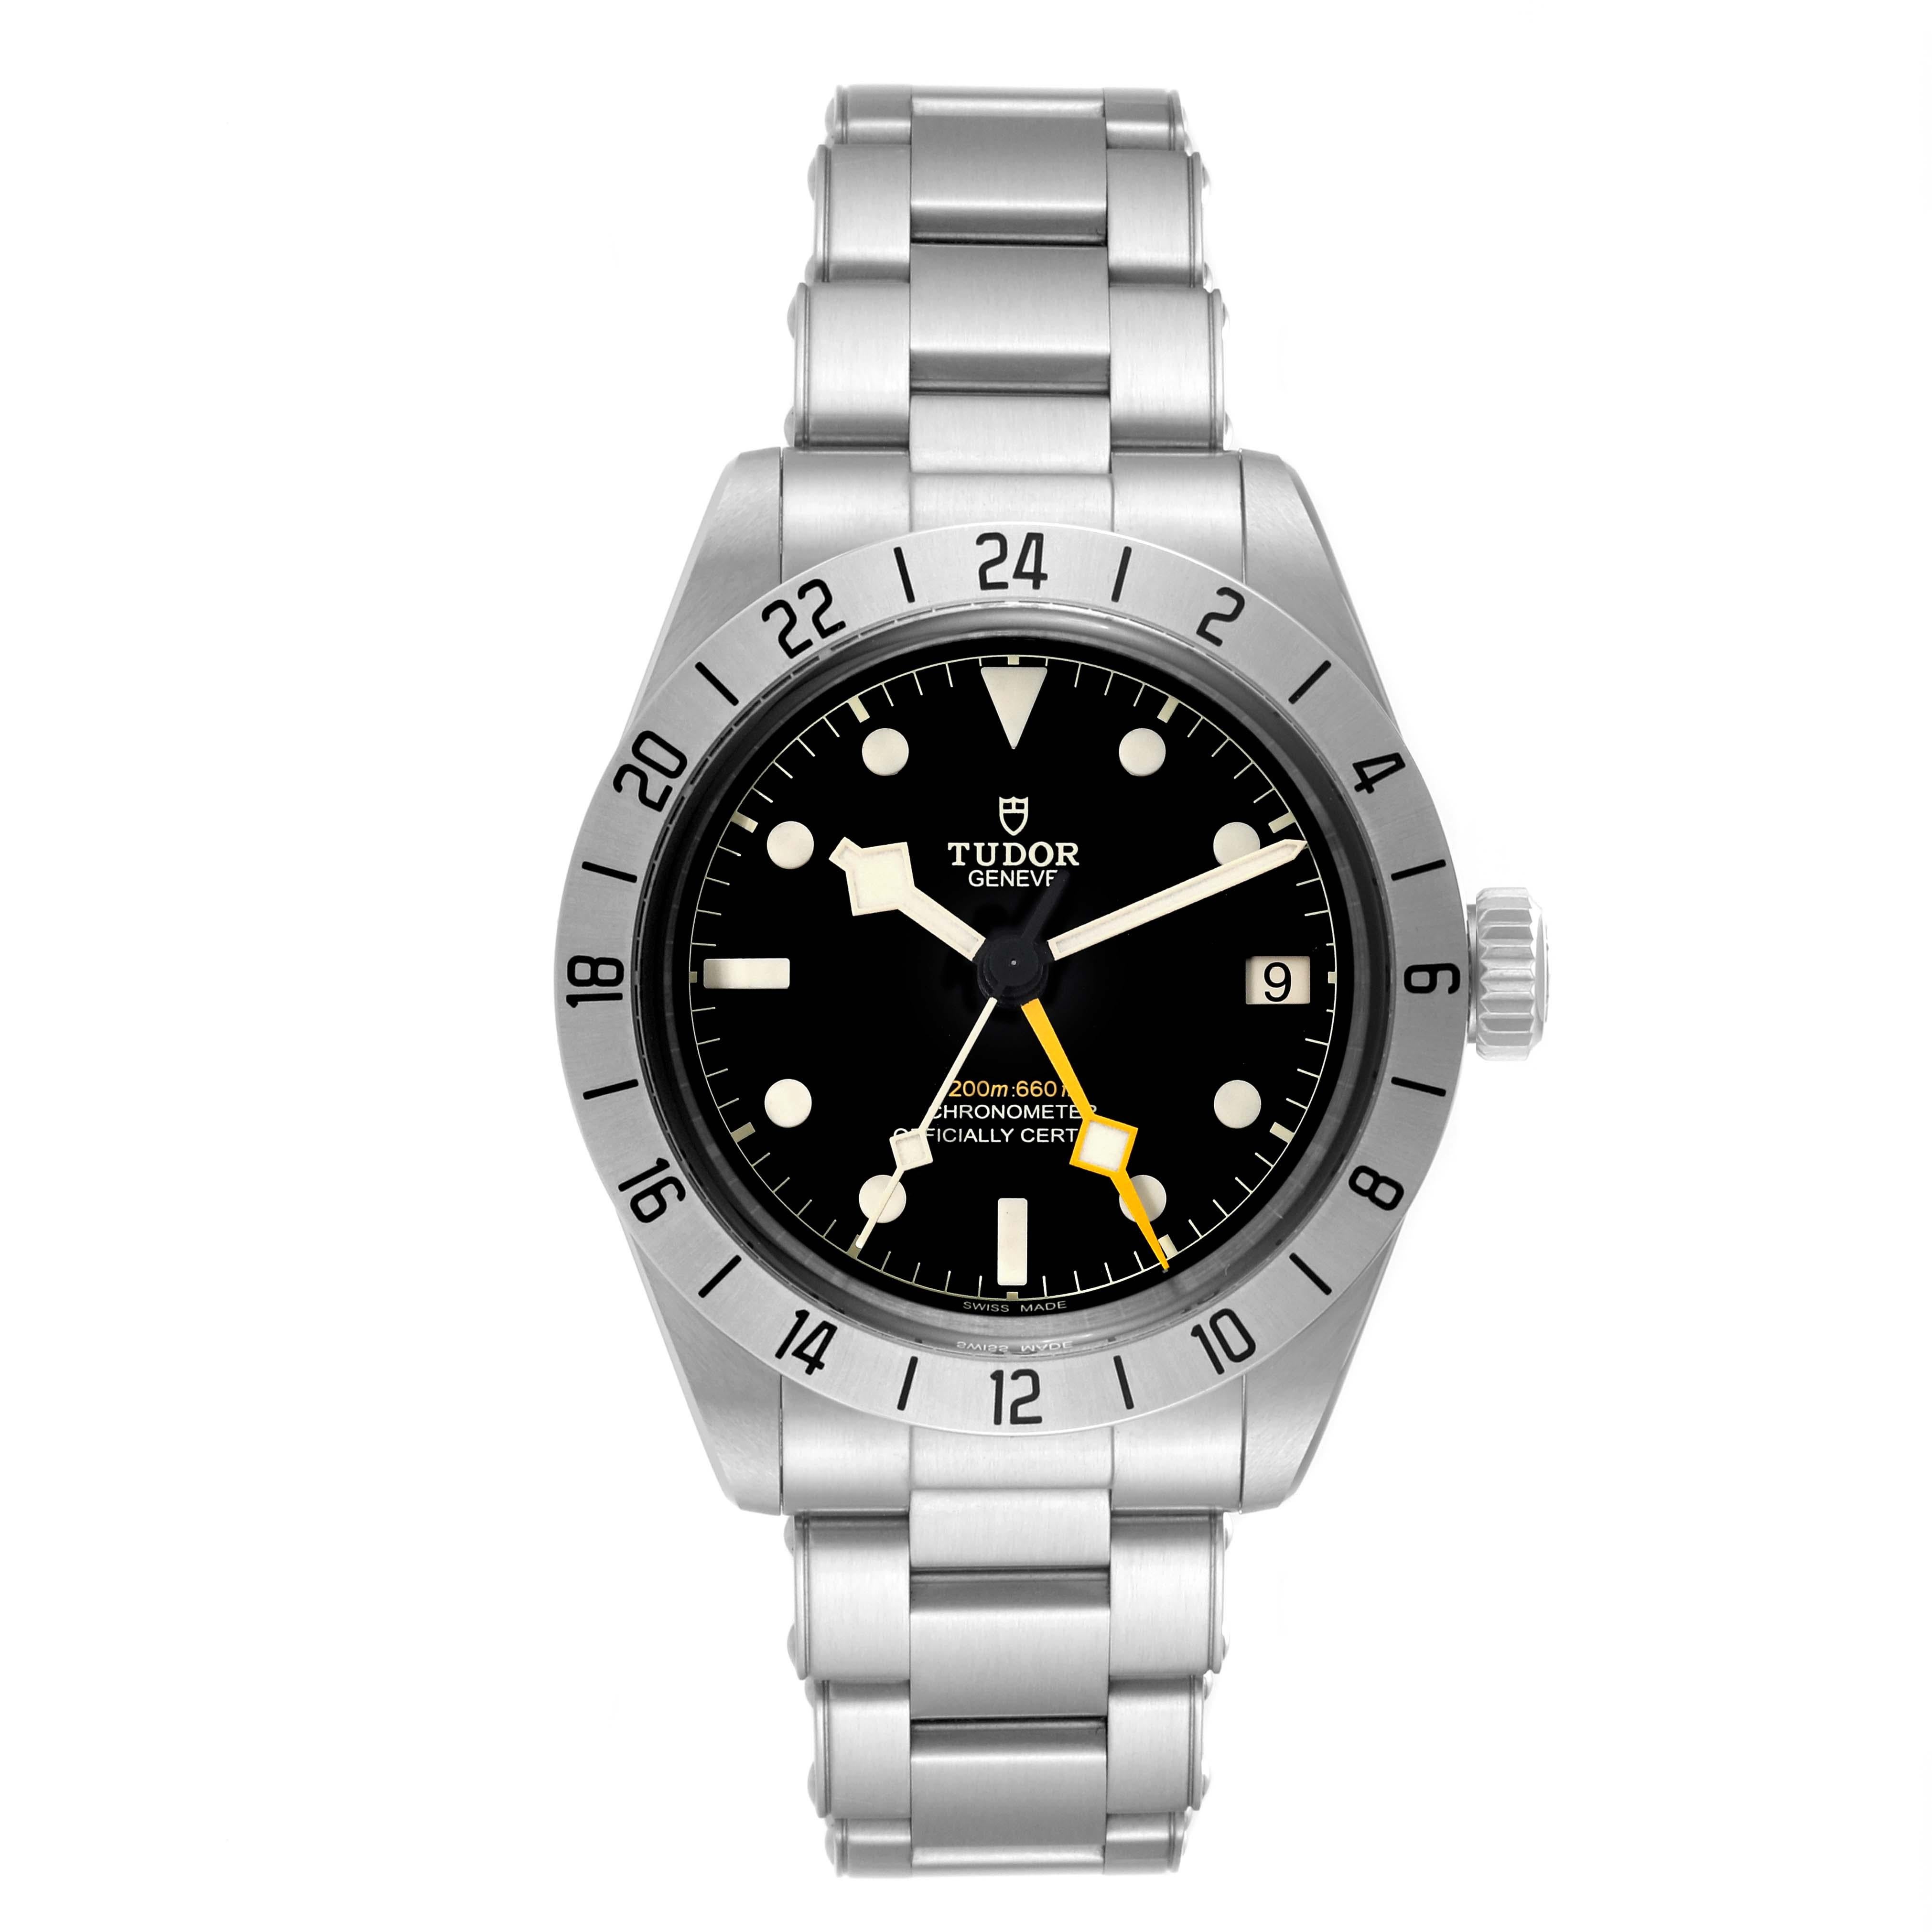 Tudor Black Bay Pro GMT Steel Mens Watch M79470 Unworn. Automatic self-winding movement. Stainless steel case 39.0 mm in diameter. Stainless steel 24 hour graduated bezel with satin finish. Scratch resistant sapphire crystal. Black dial with